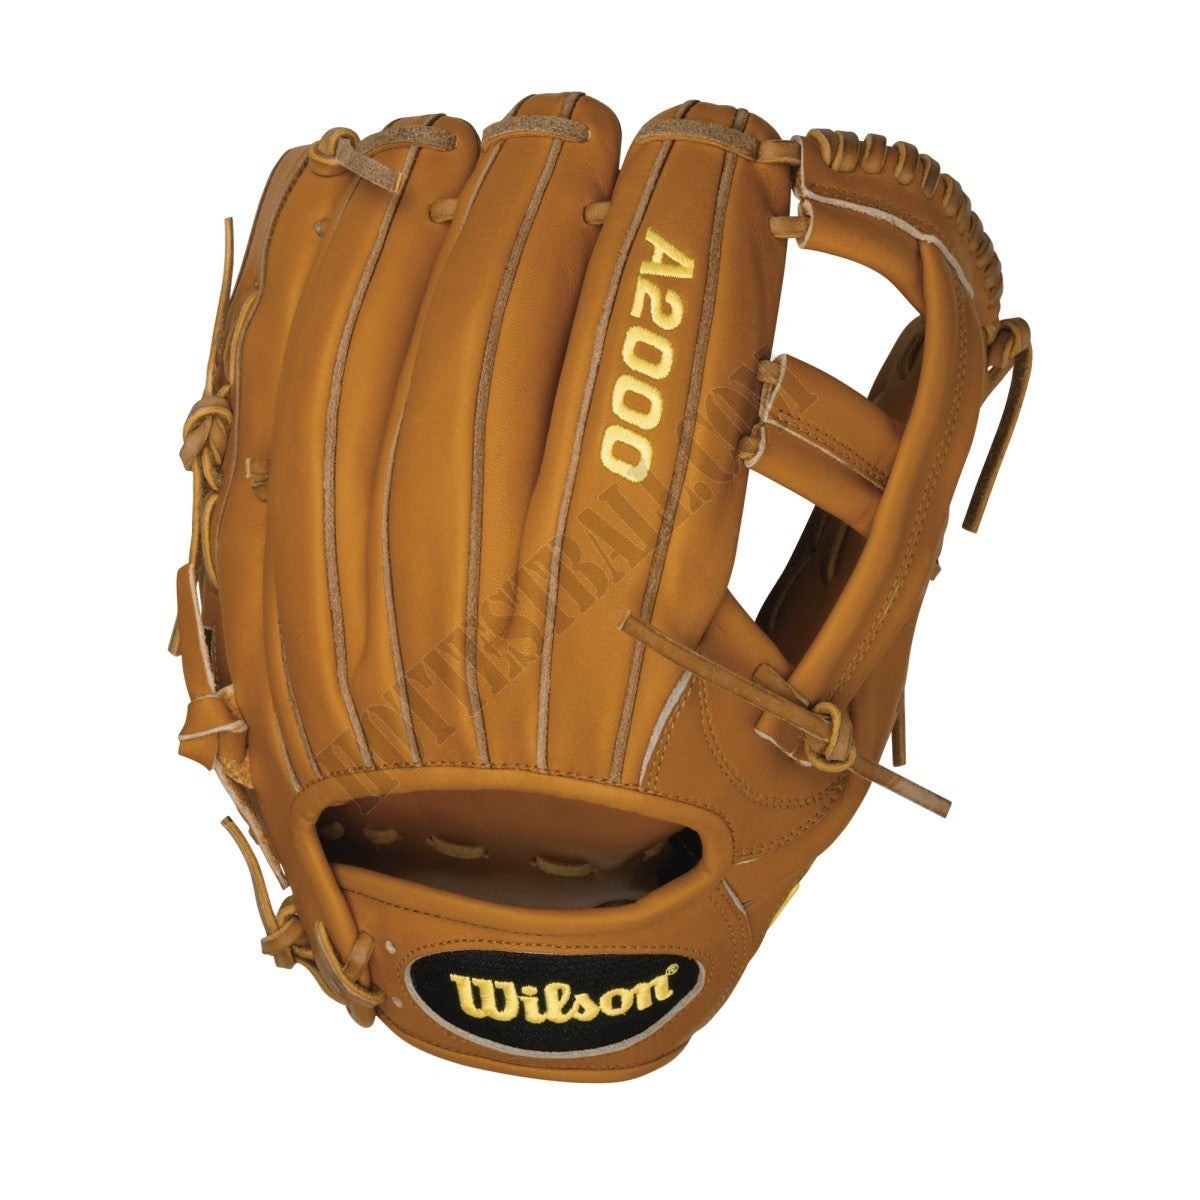 A2000 Evan Longoria GM Glove - Right Hand Throw, 11.75 in ● Wilson Promotions - -1